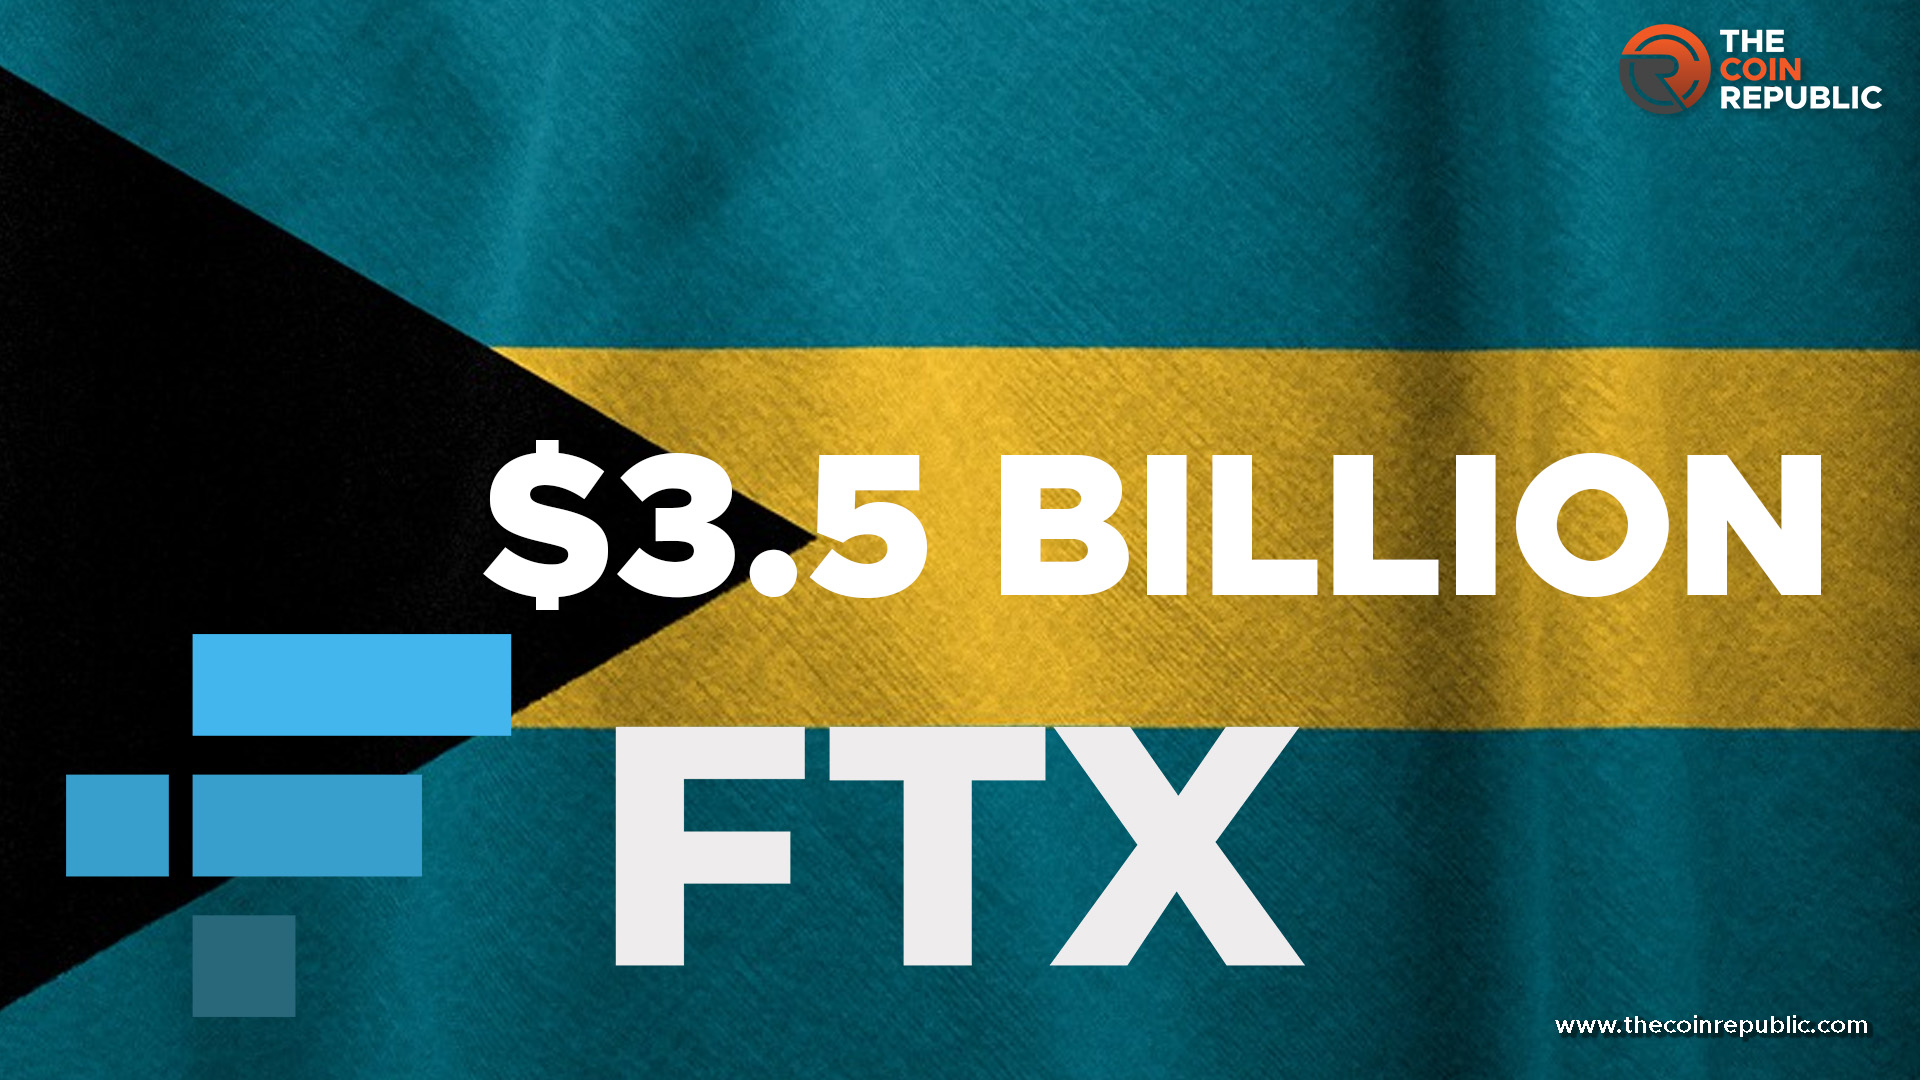 Bahamas Securities Commission Holds FTX Users’ Assets Temporarily